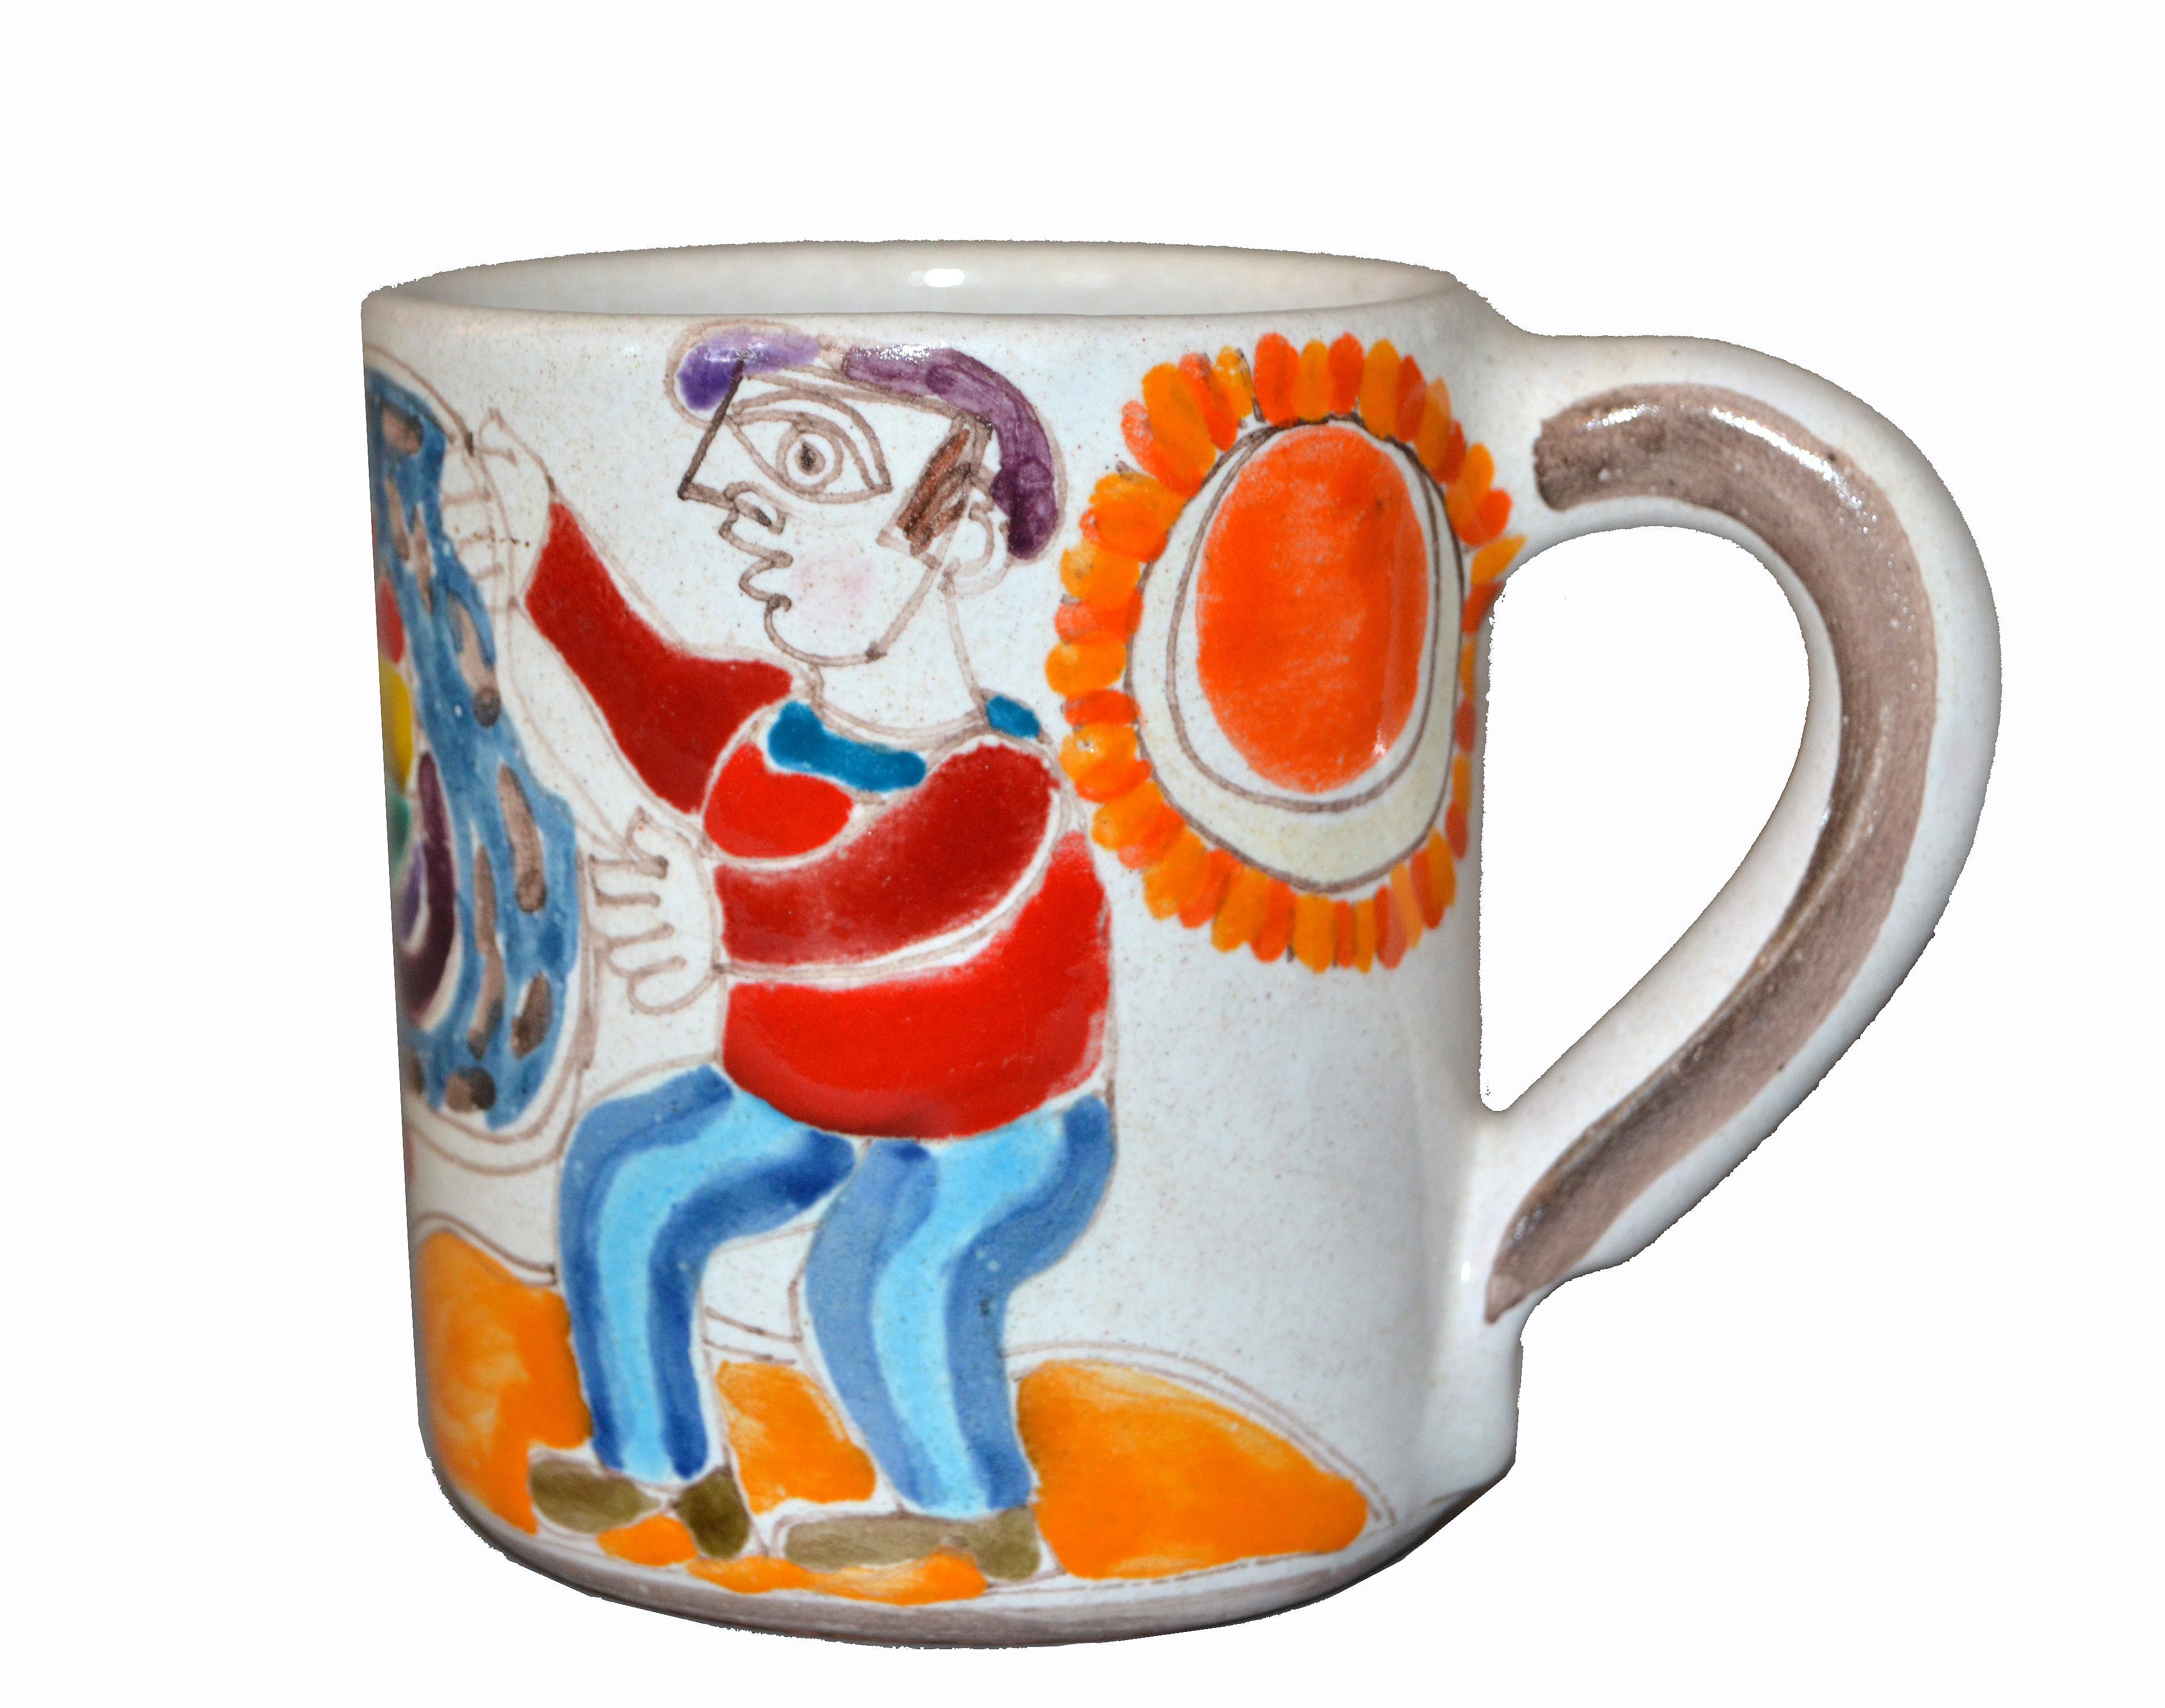 Original Italian Giovanni Desimone hand painted art pottery, decor mug or cup with a scene of a fisherman casting his net and caught two fish on a sunny day.
The mug is glazed and very colorful.
DeSimone Mark and numbered underneath, 'DeSimone,